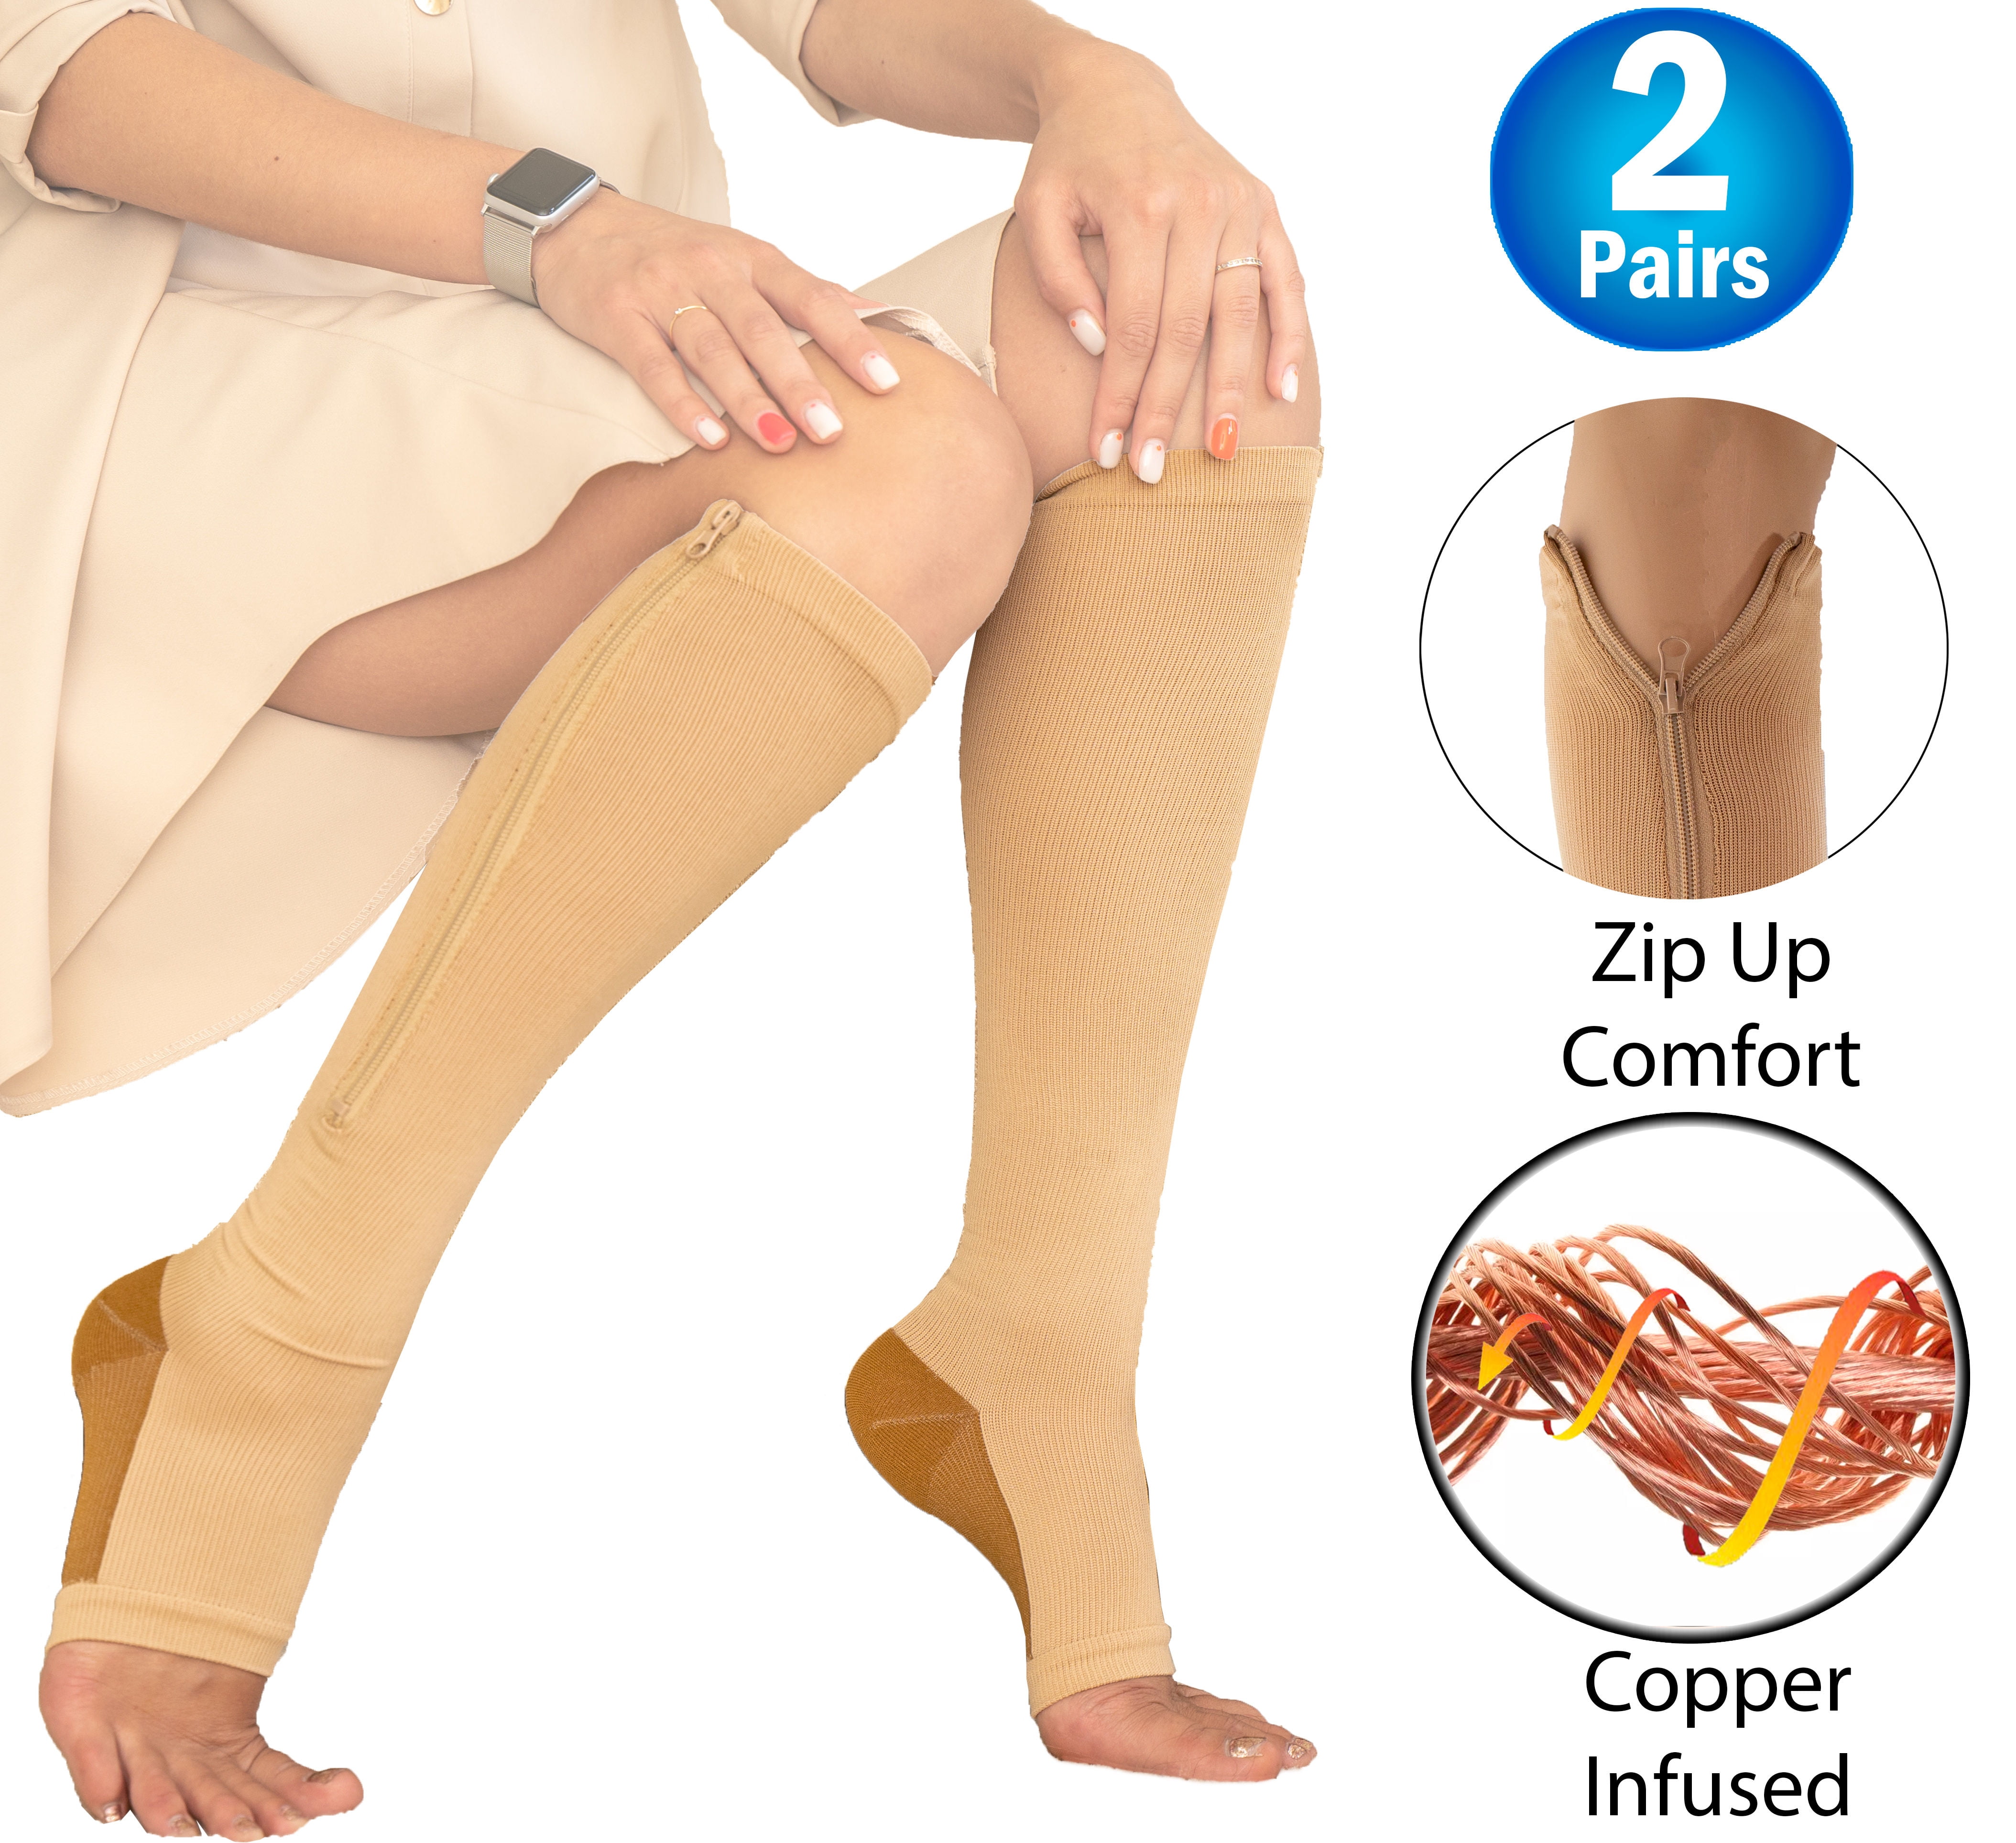 2 Copper Zipper Compression Socks w/ Open Toe Knee High Support Stockings -  Soft, Breathable Compression Socks For Support, Reduce Swelling & Better  Circulation - Nude Medium 